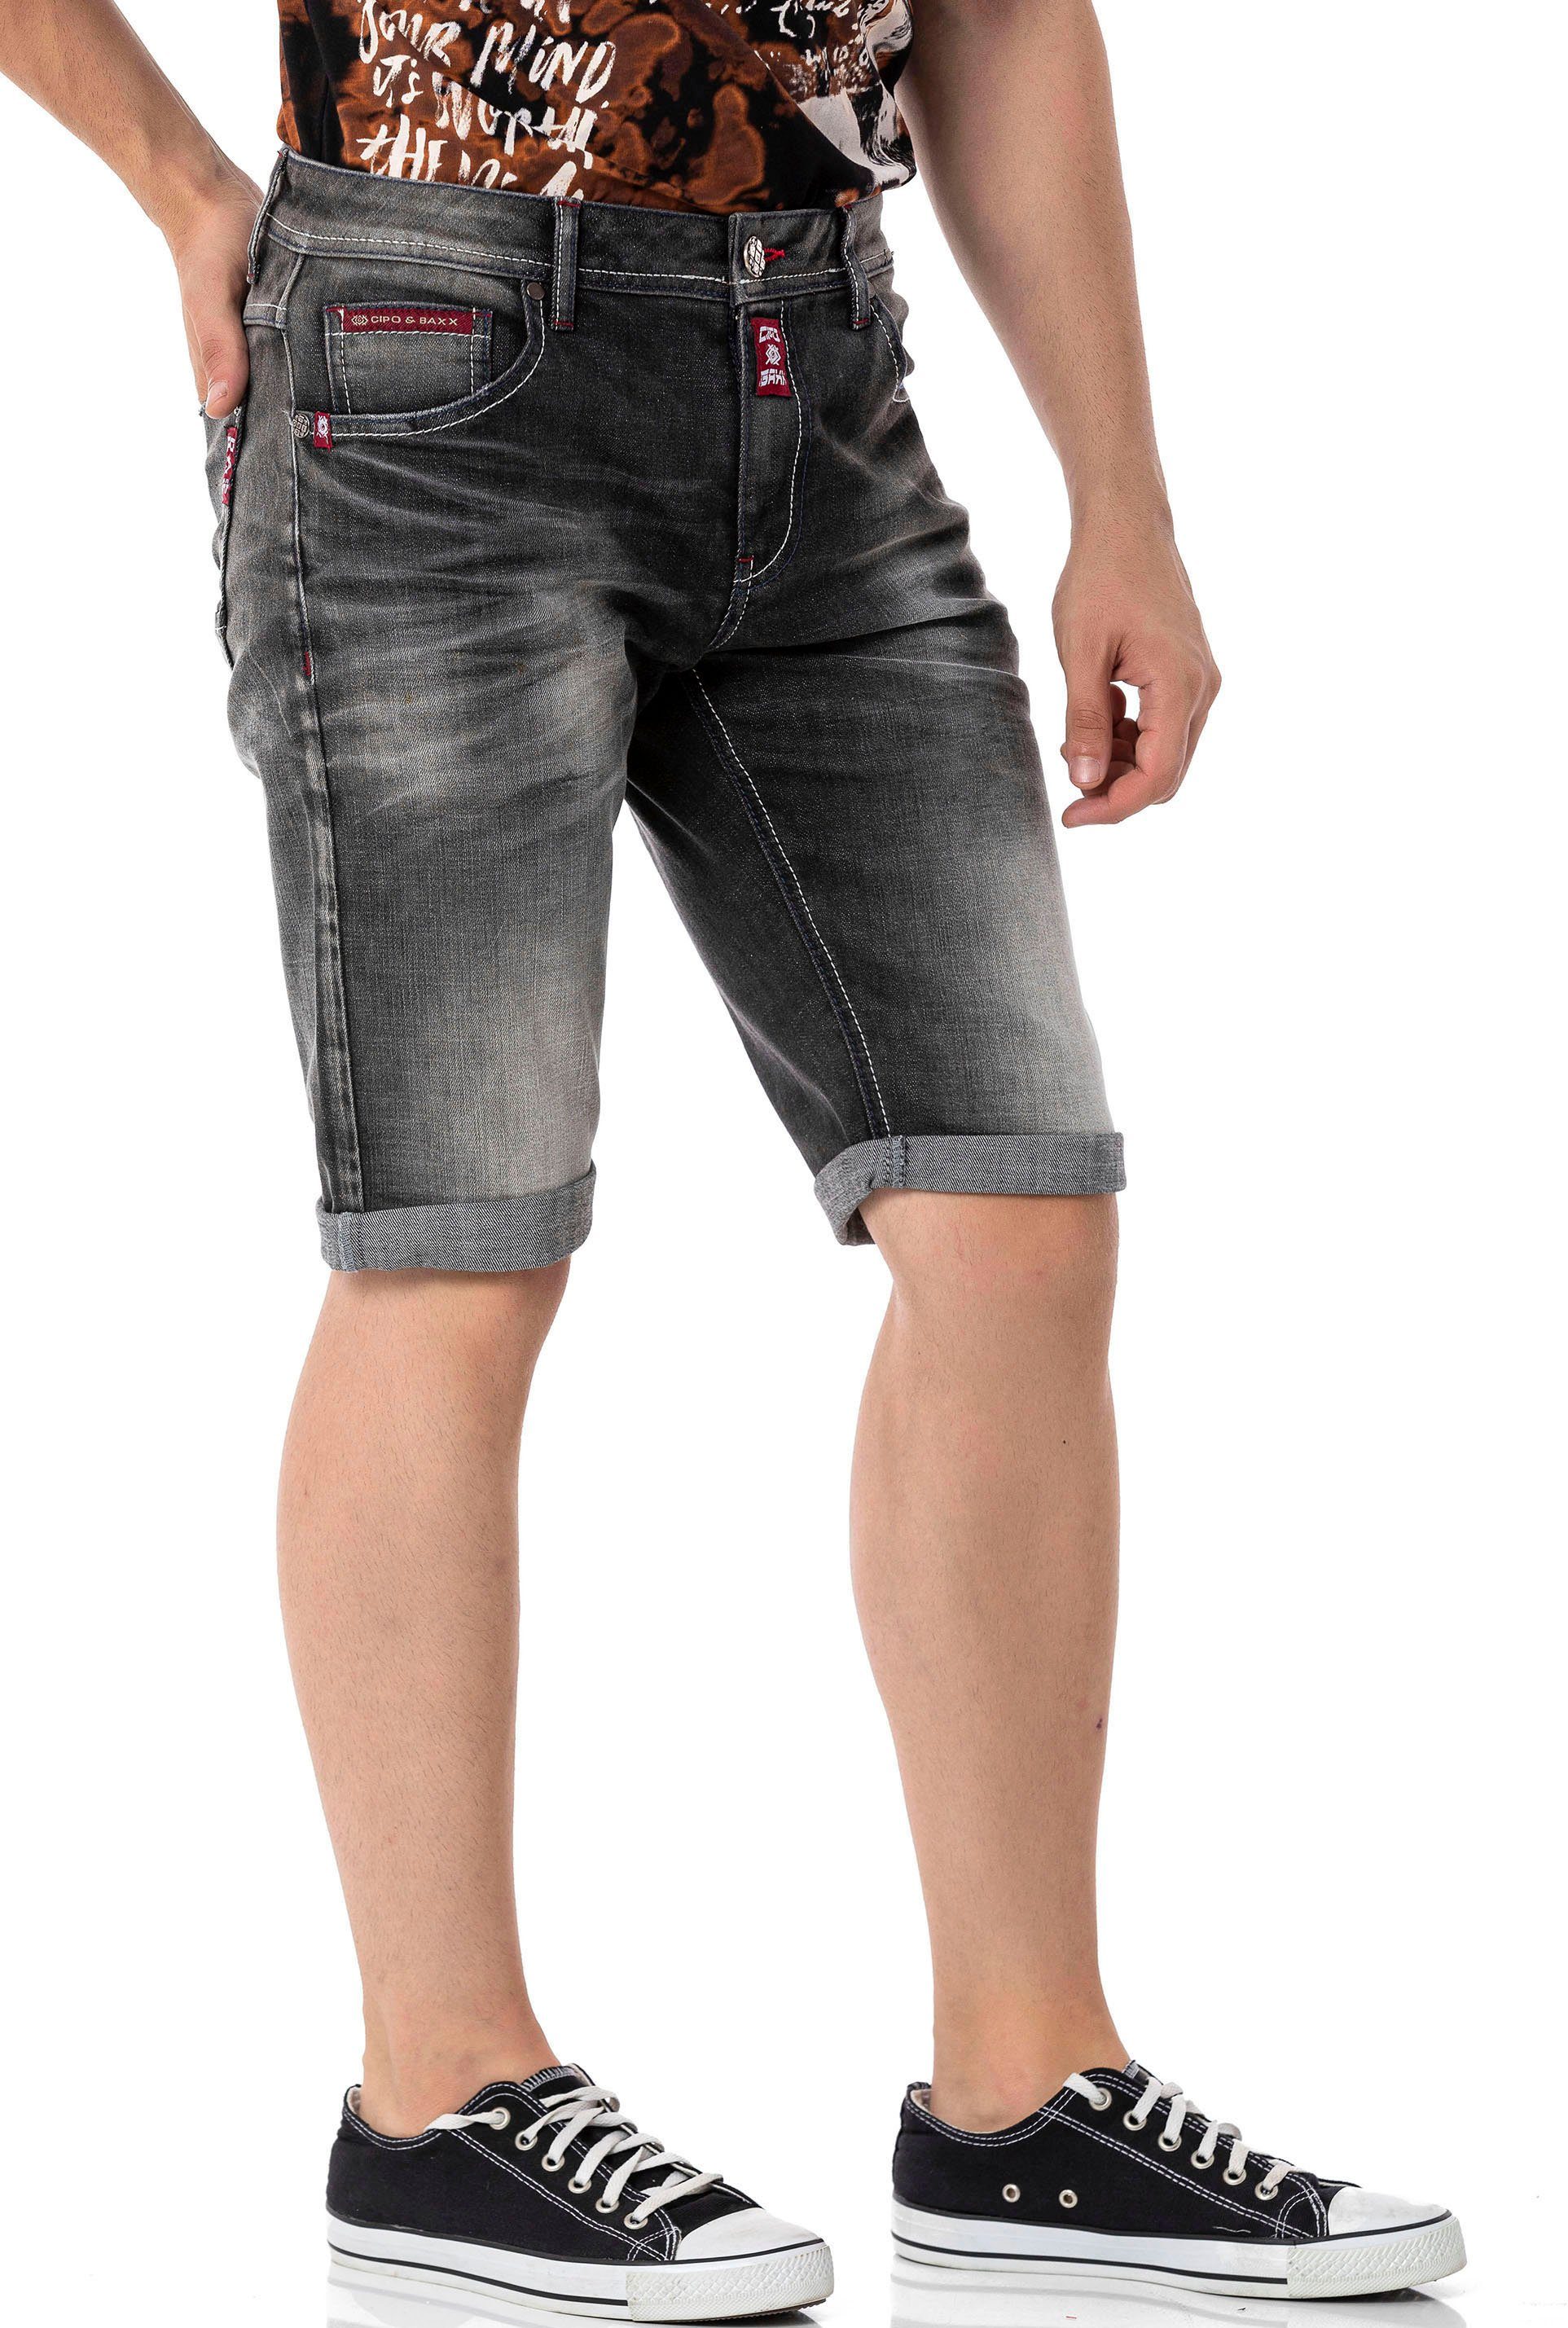 Cipo & Jeansshorts used black Baxx